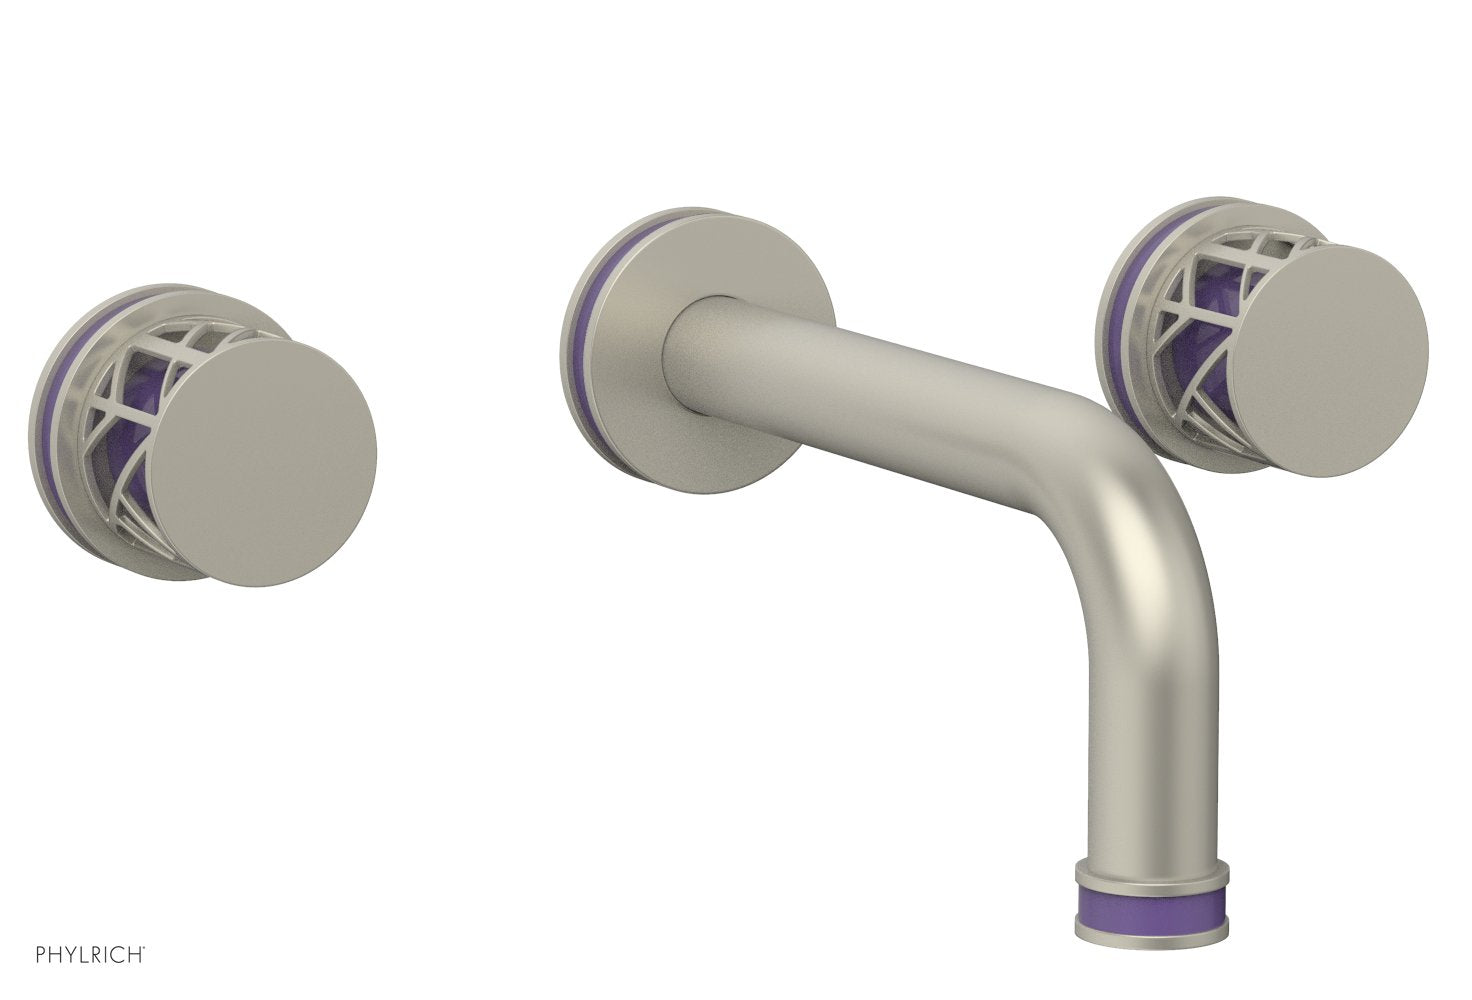 Phylrich JOLIE Wall Lavatory Set - Round Handles with "Purple" Accents